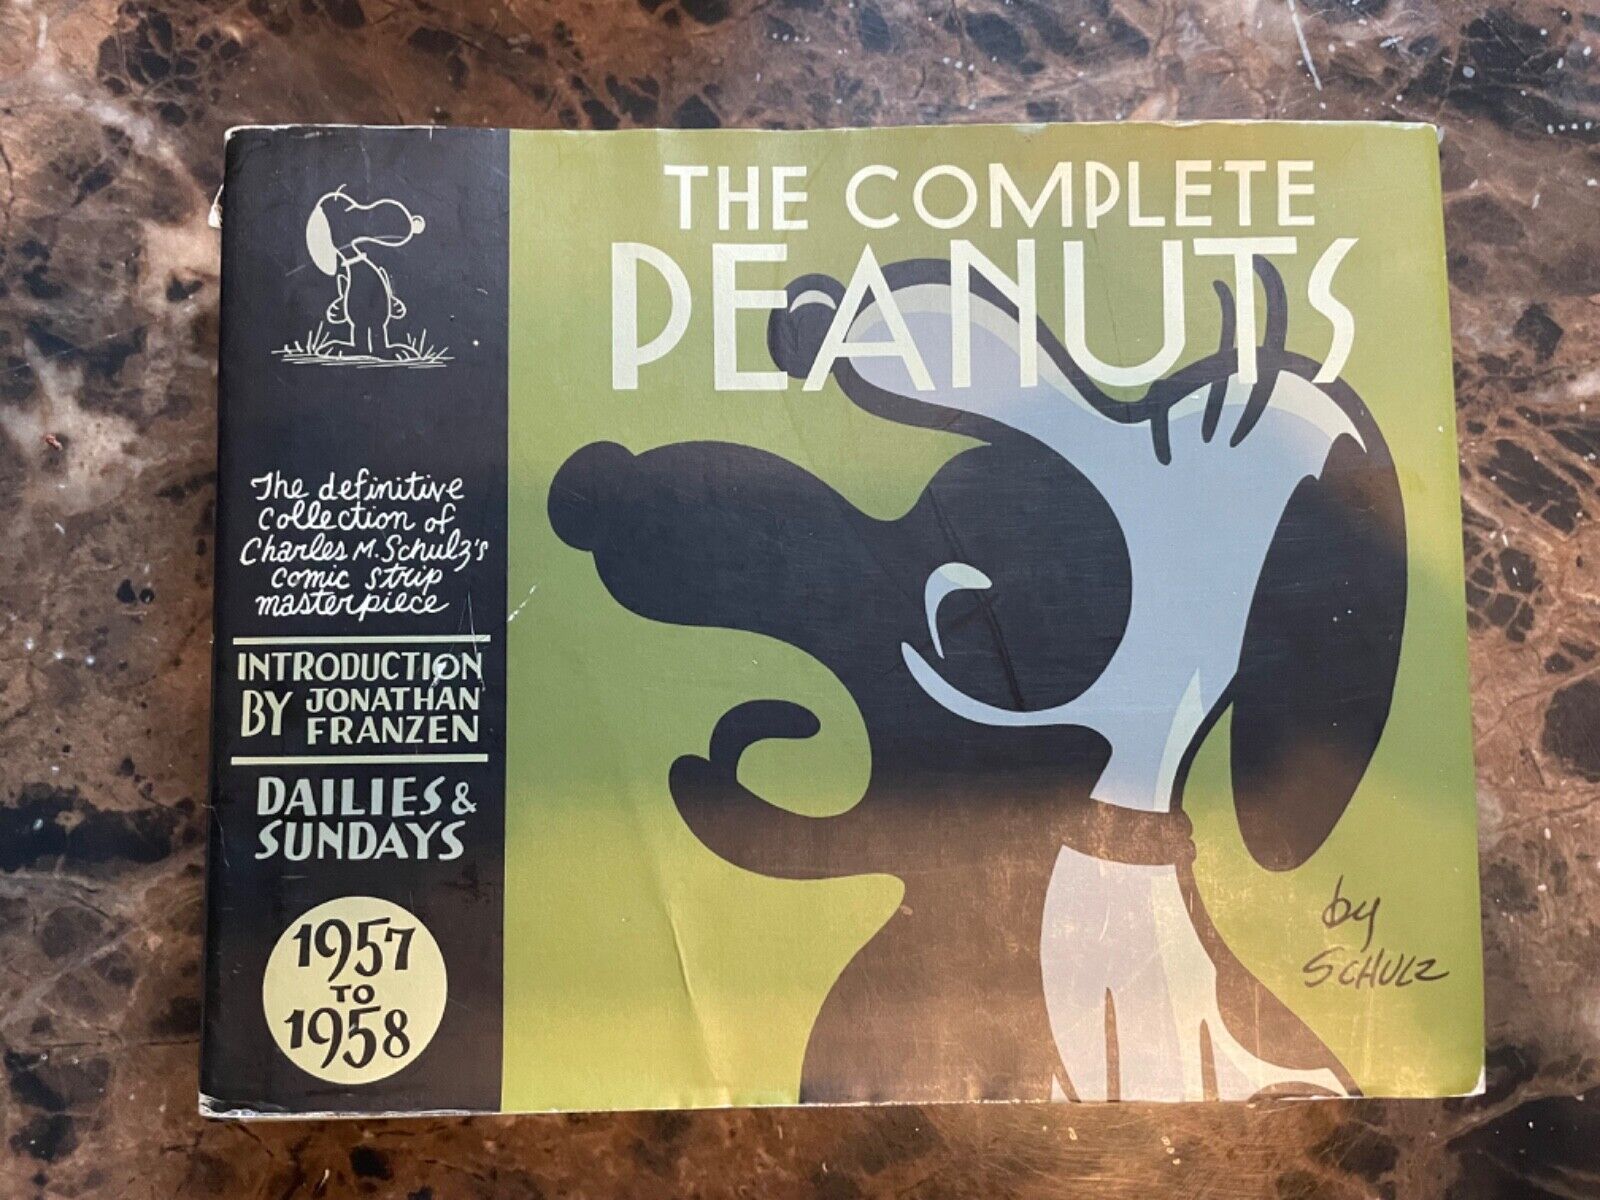 The Complete Peanuts #1957 (Fantagraphics Books, September 2005)